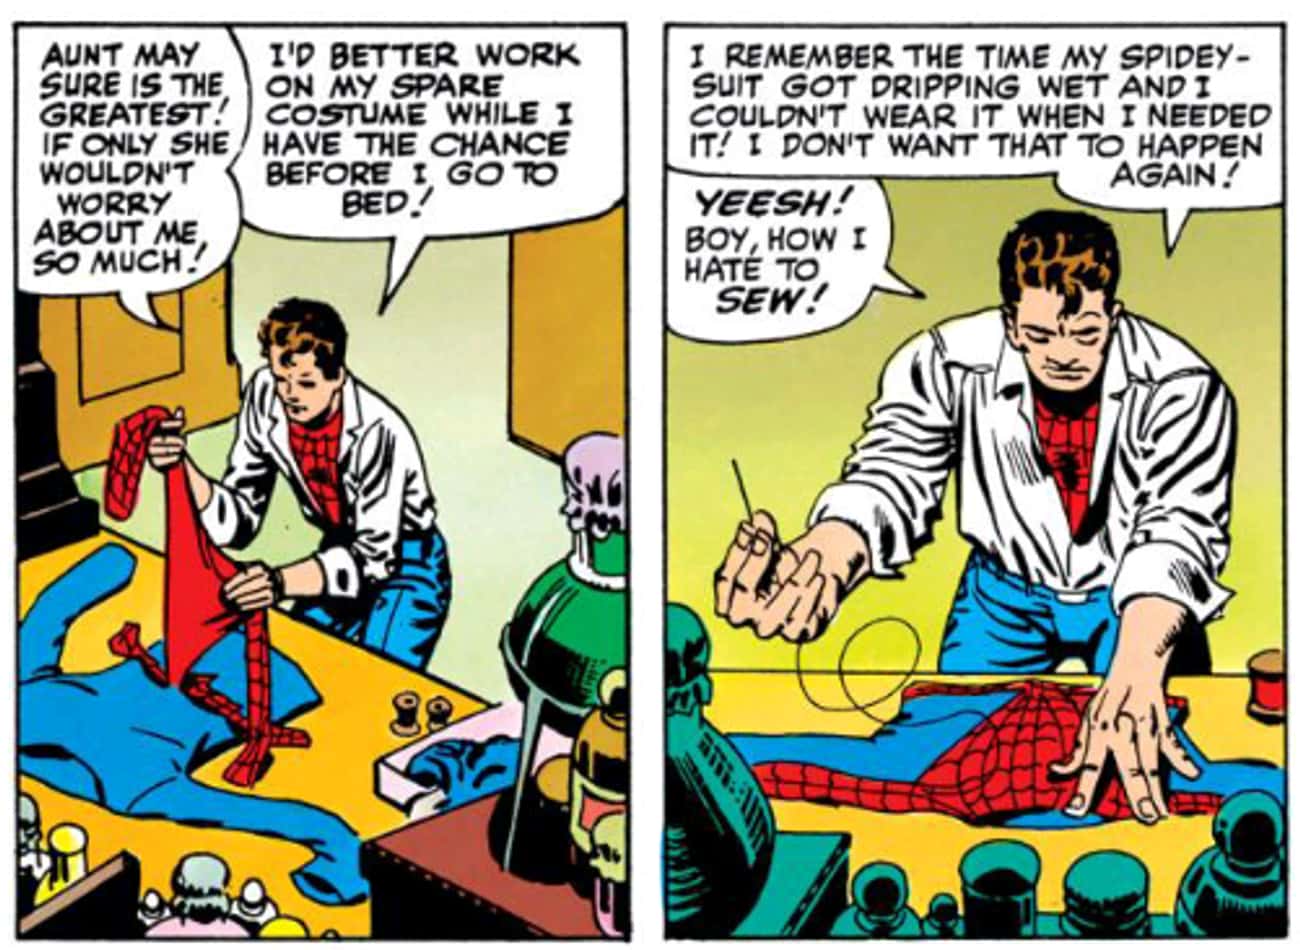 Spider-Man Sewed His Own Costume To Protect His Identity While Exploring A Showbiz Career